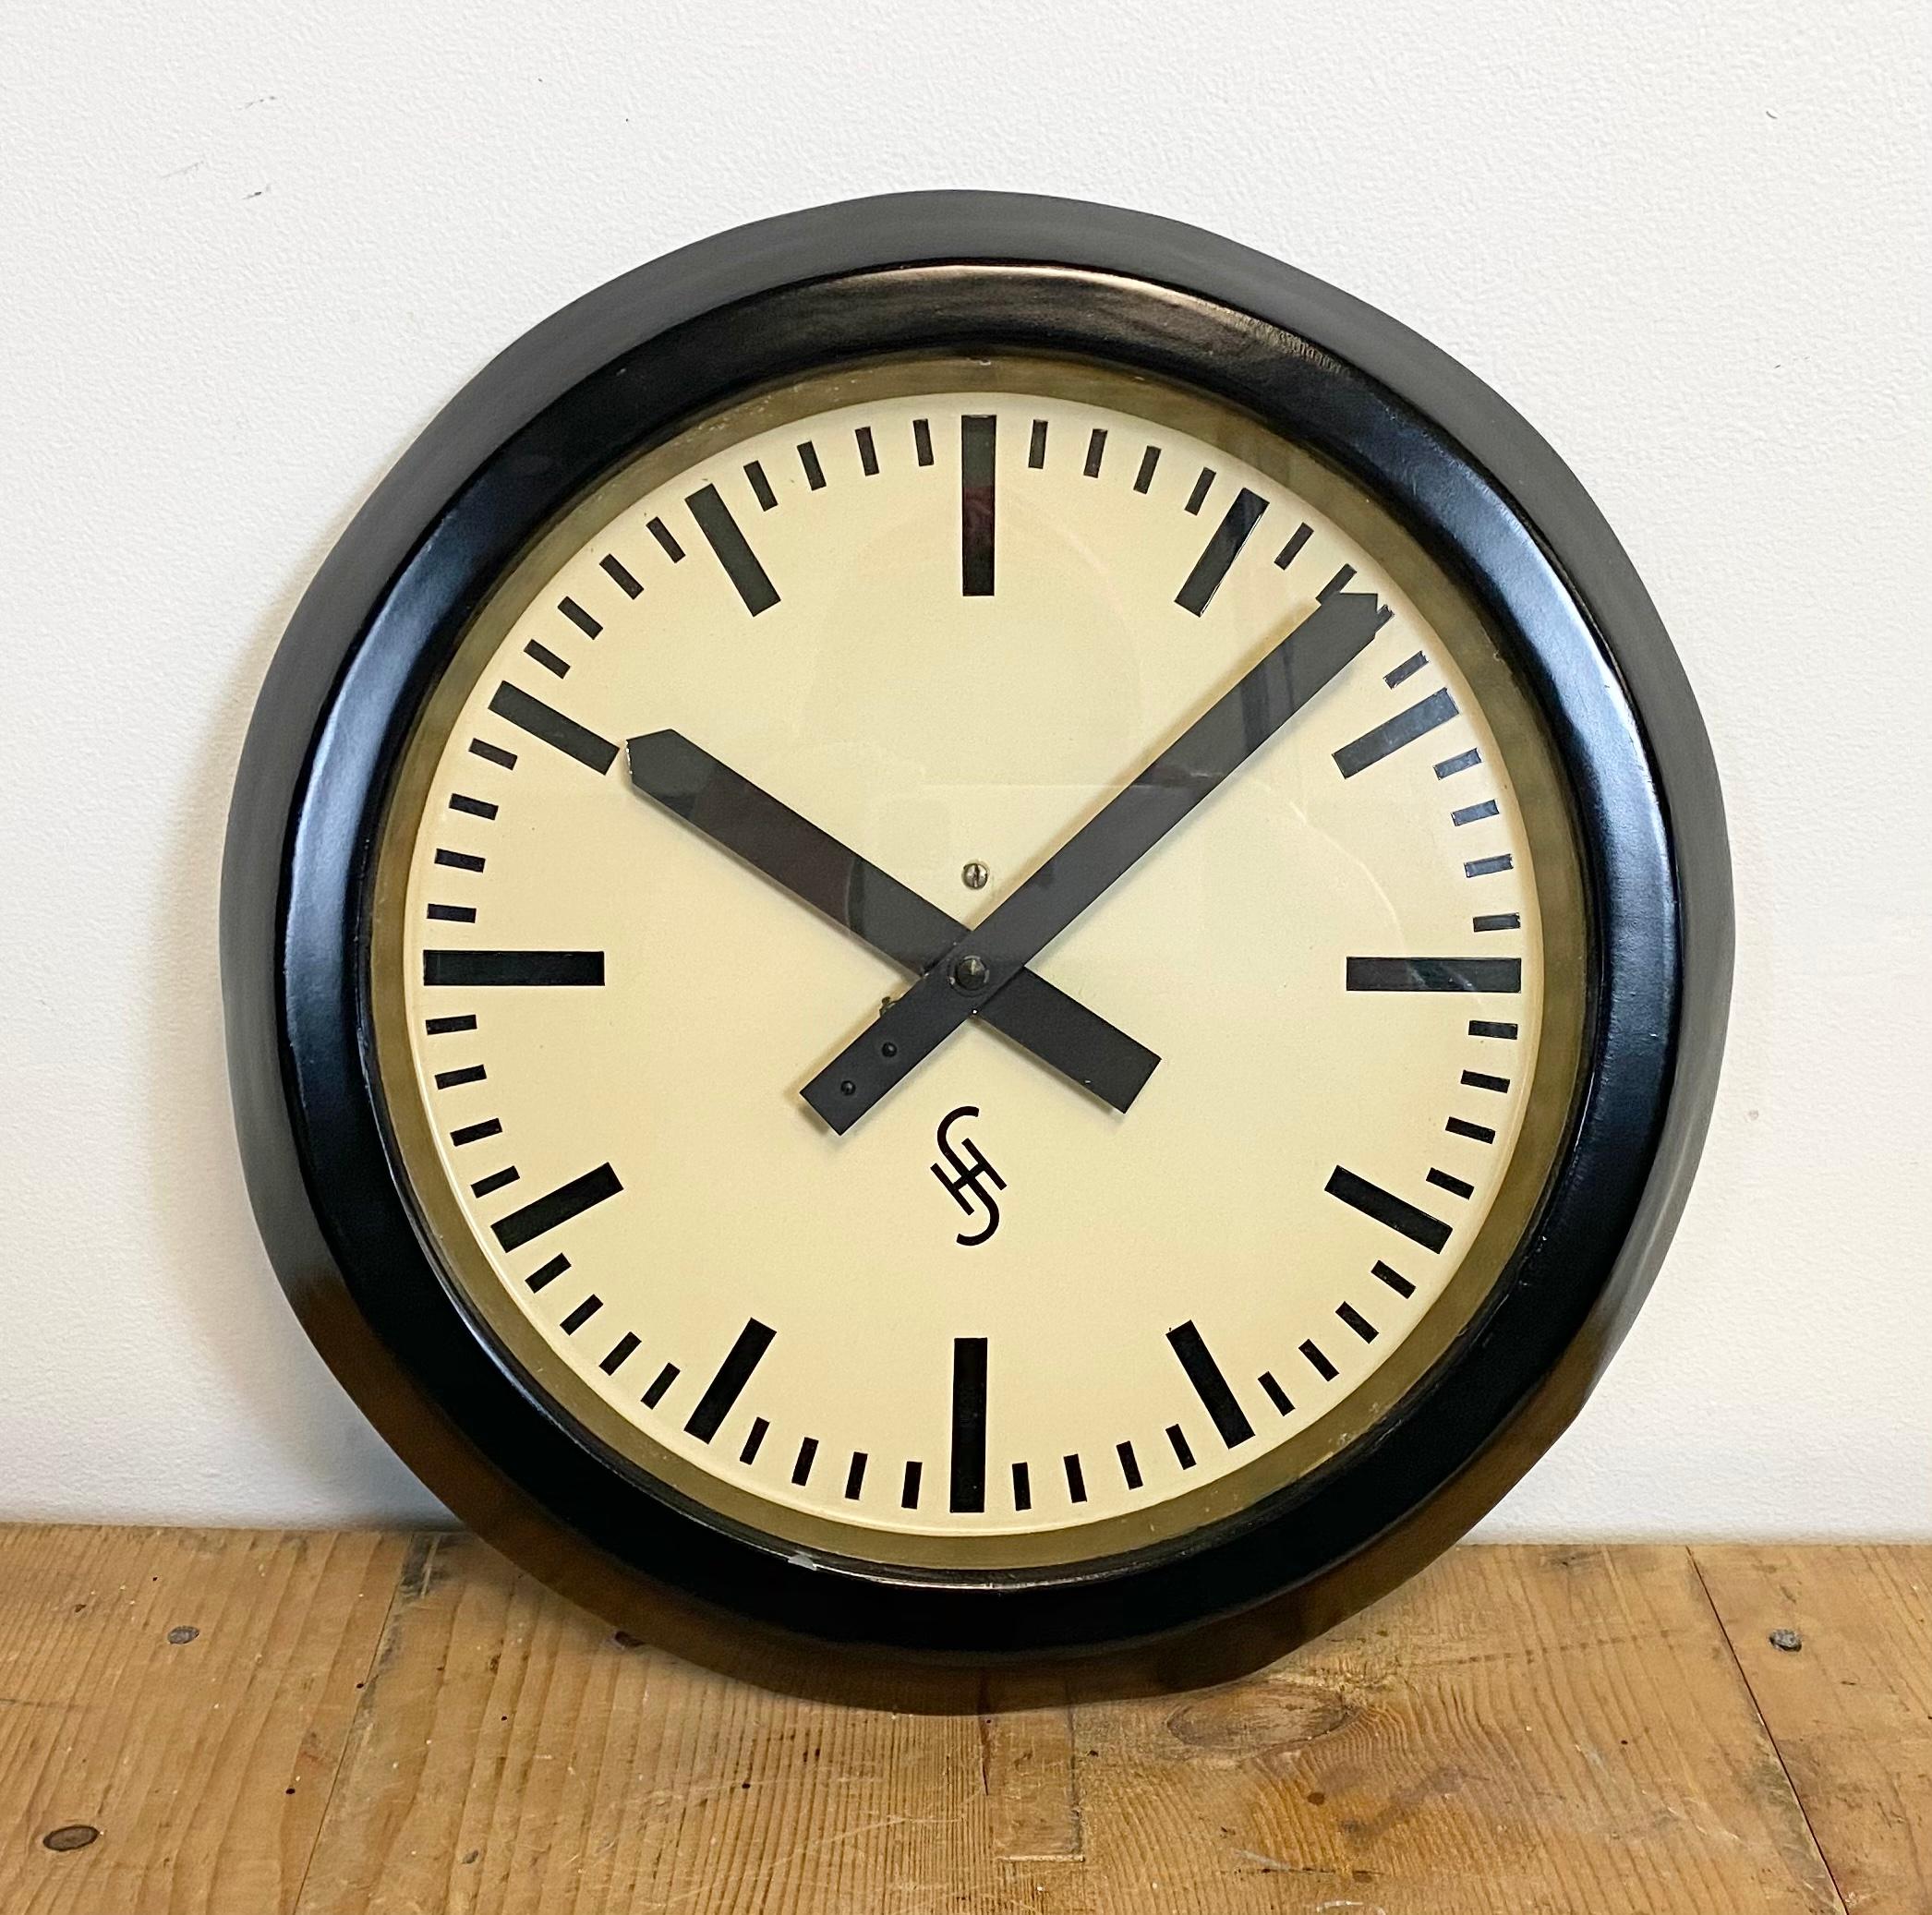 This wall clock was produced by Siemens and Halske in Germany during the 1950s. It features a black metal frame, aluminum dial, and a clear glass cover. The piece has been converted into a battery-powered clockwork and requires only one